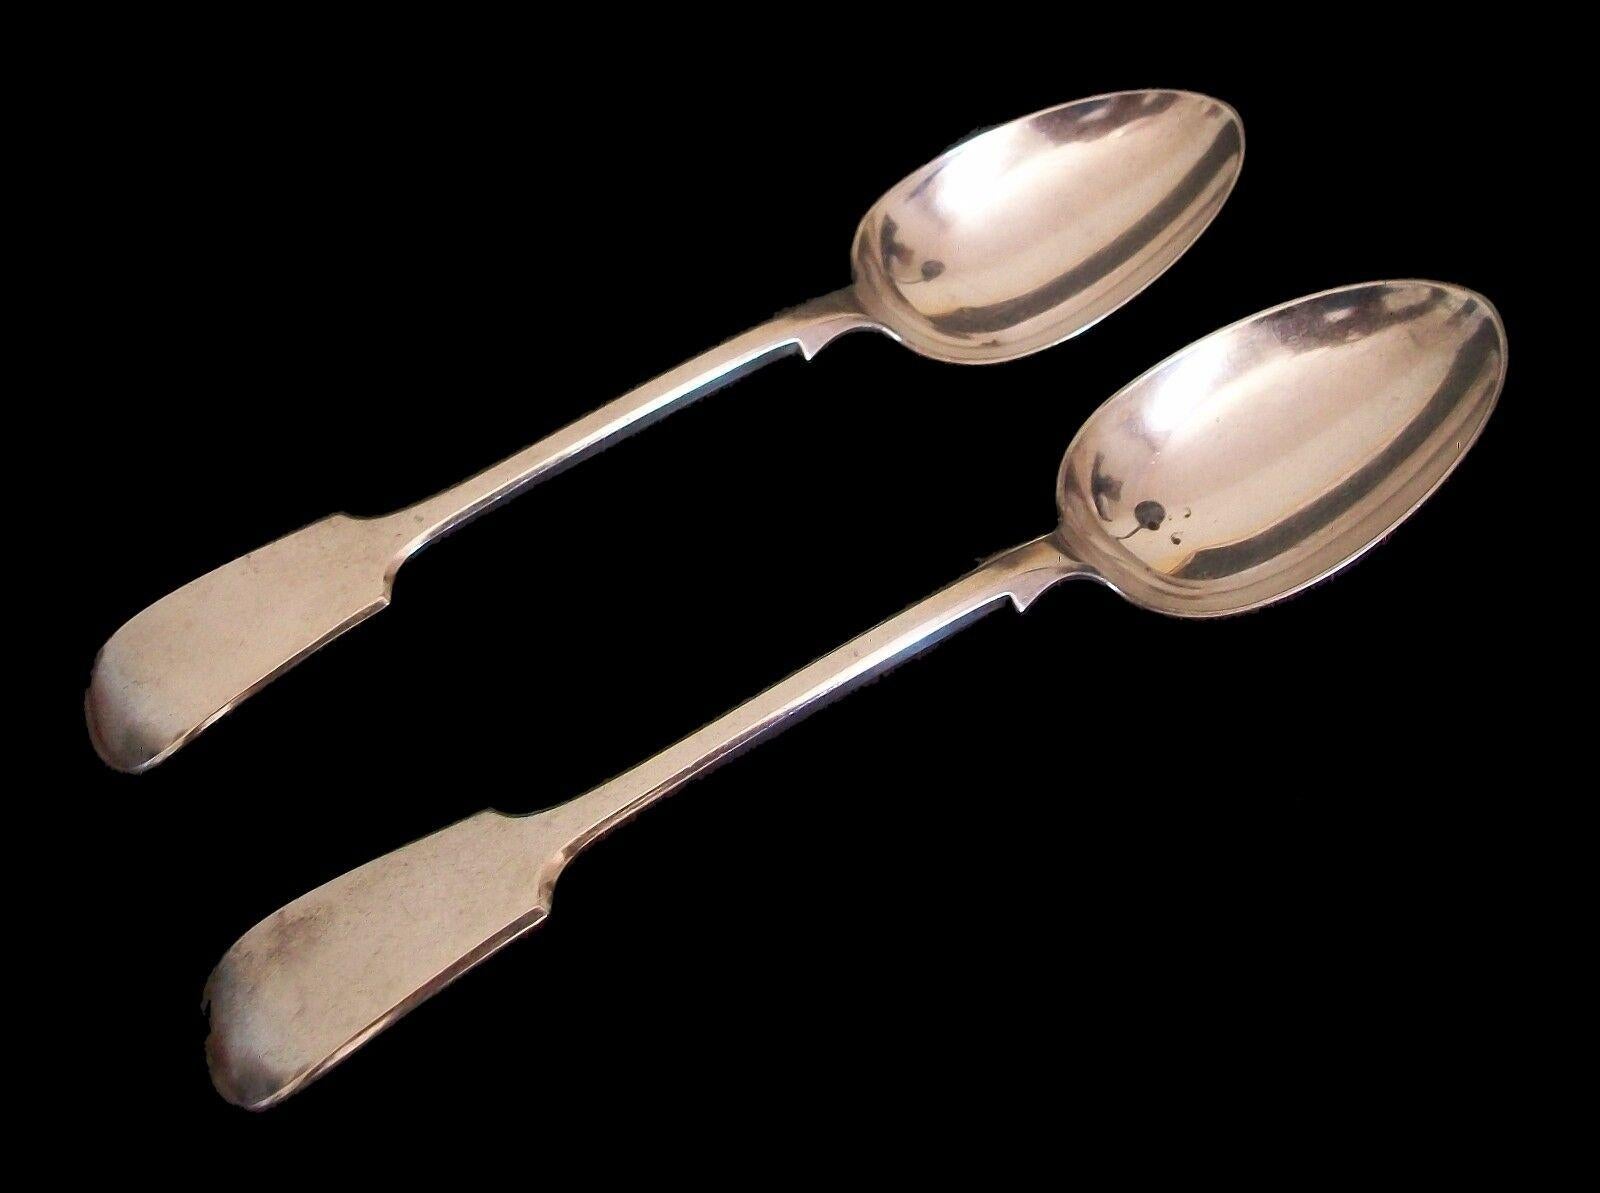 WILLIAM HUTTON & SONS - Antique pair of silver-plate serving spoons - signed on the back of each spoon - United Kingdom - circa 1900.

Excellent antique condition - no loss - no damage - no restoration - tarnishing with scuffs & scratches from age